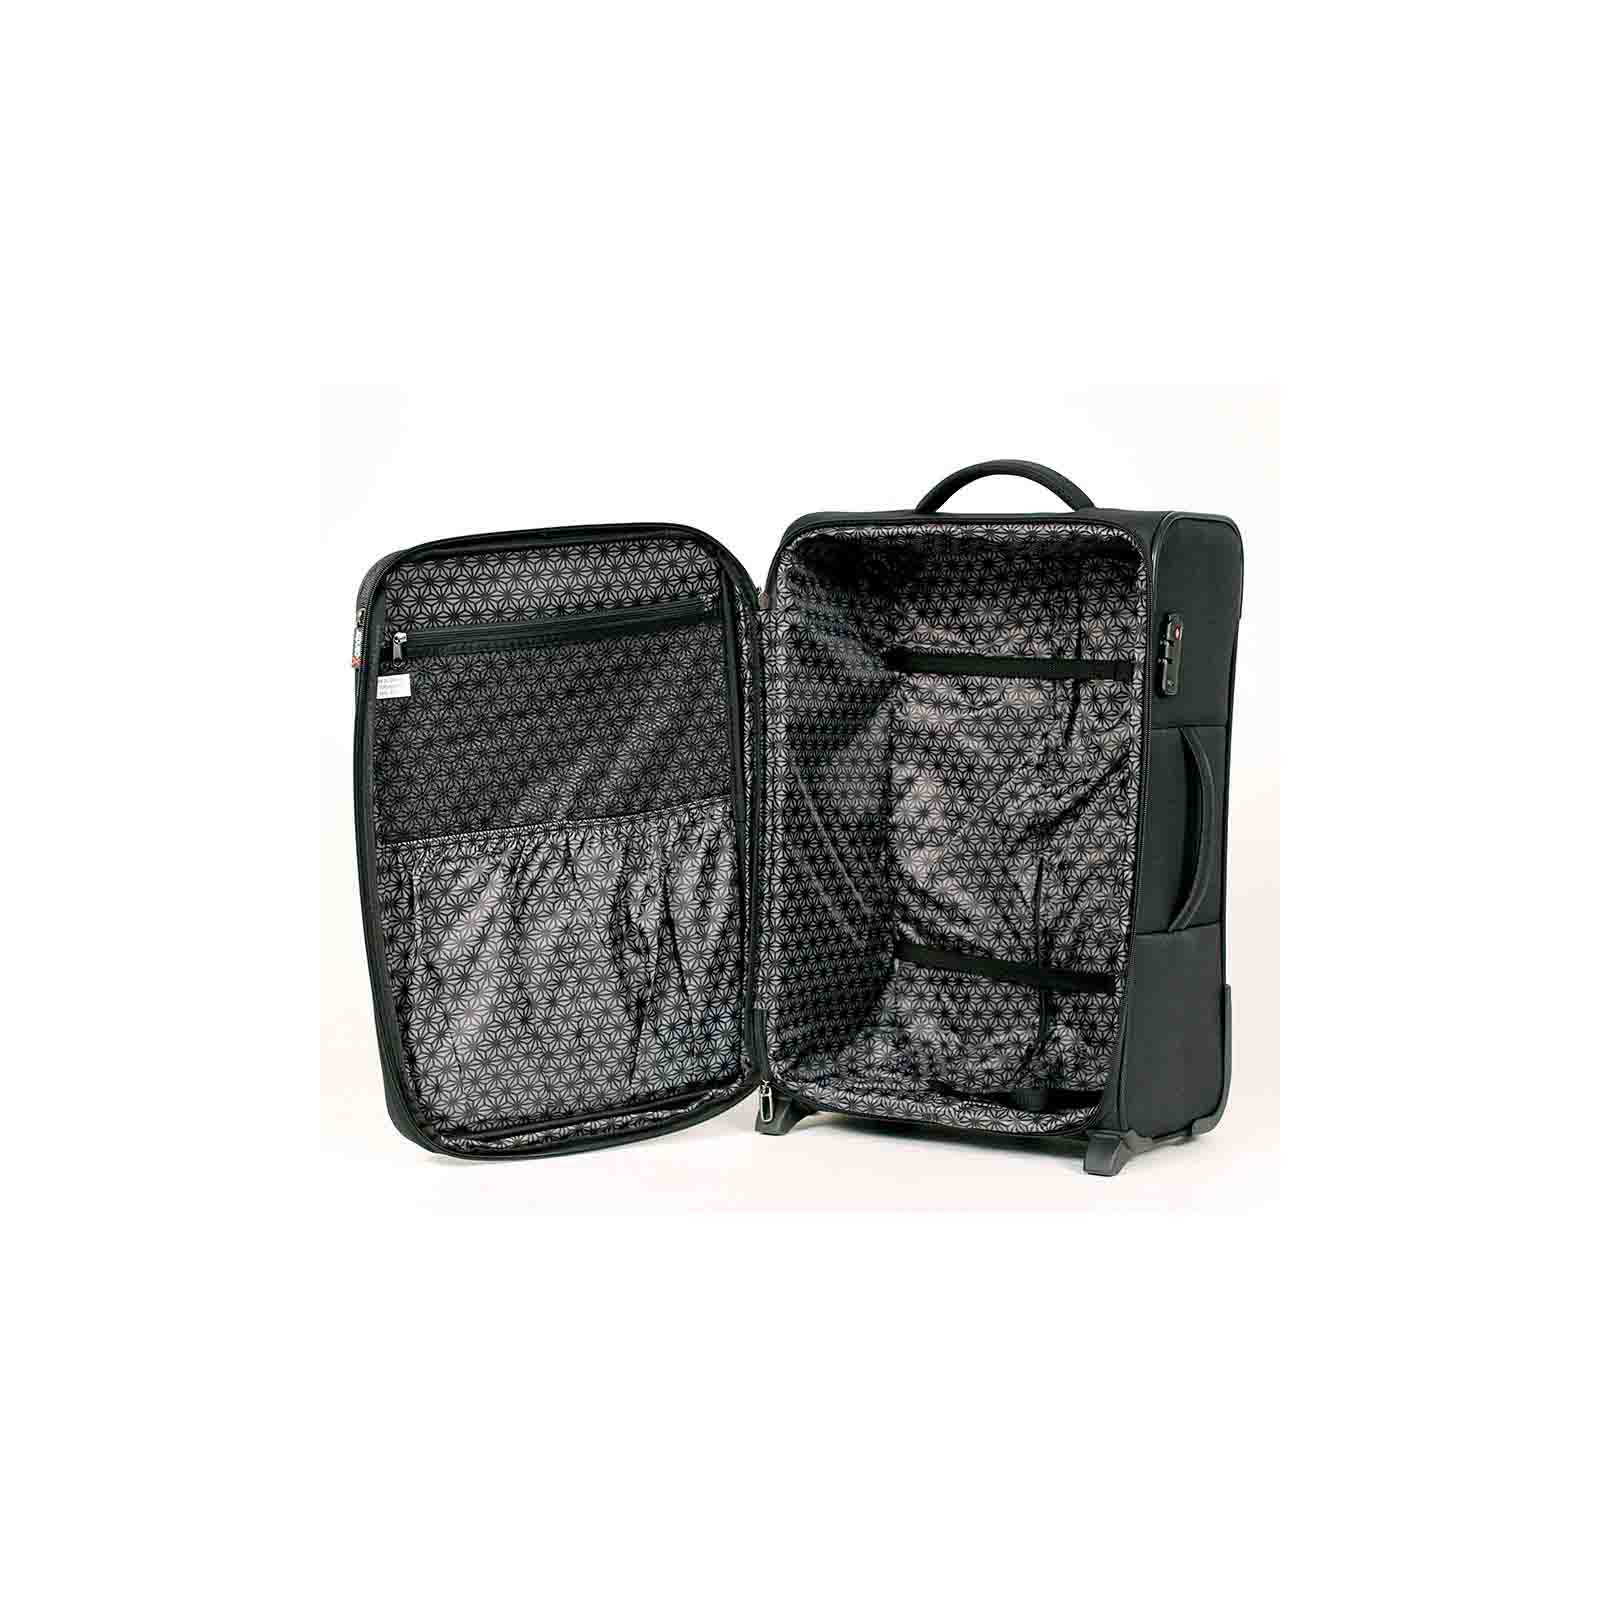 tosca-so-lite-2-wheel-carry-on-suitcase-black-open